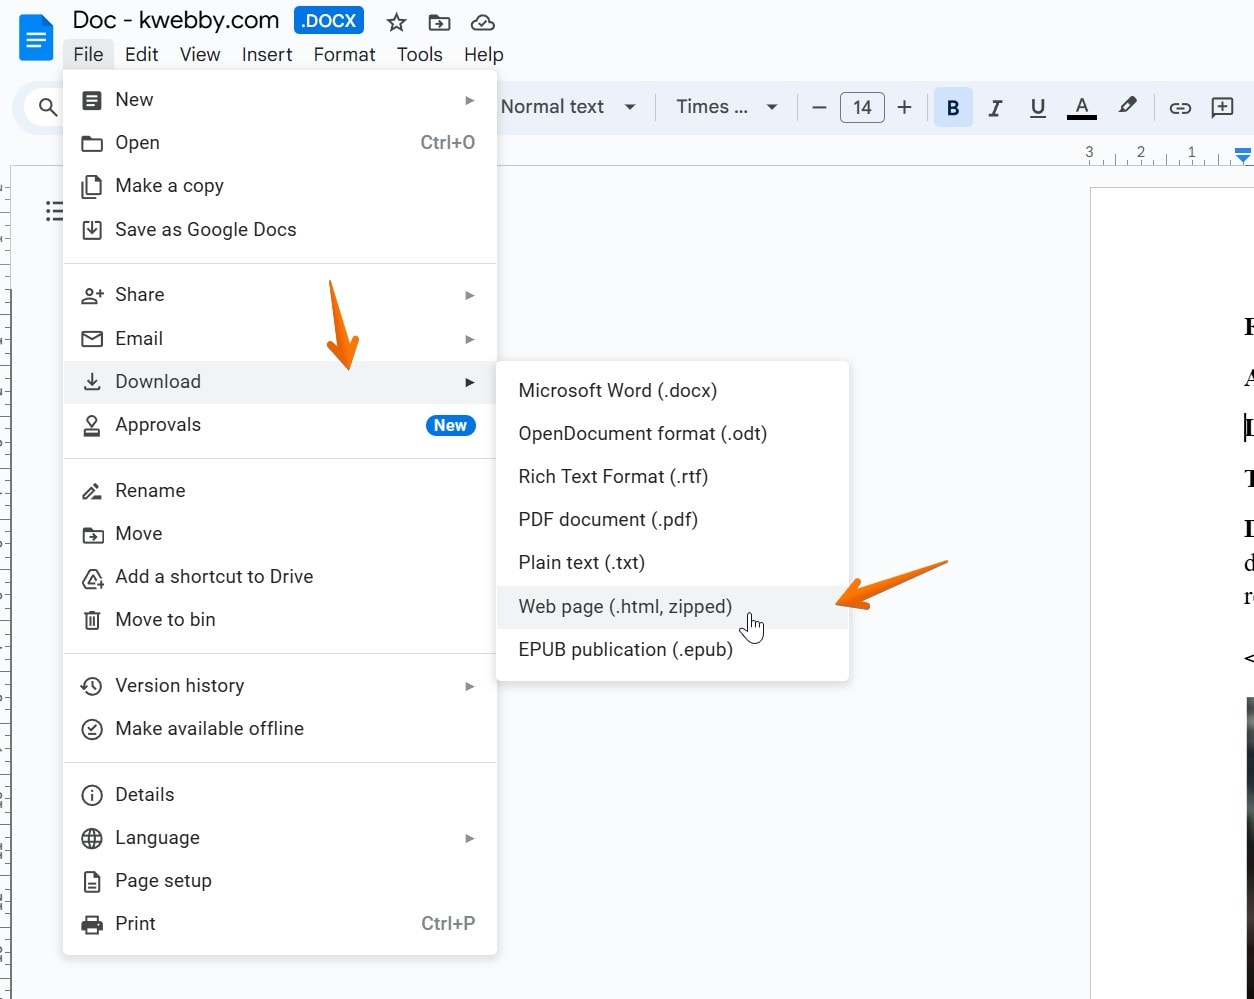 How to Download an Image from a Google Doc (3 Easy Ways) 9